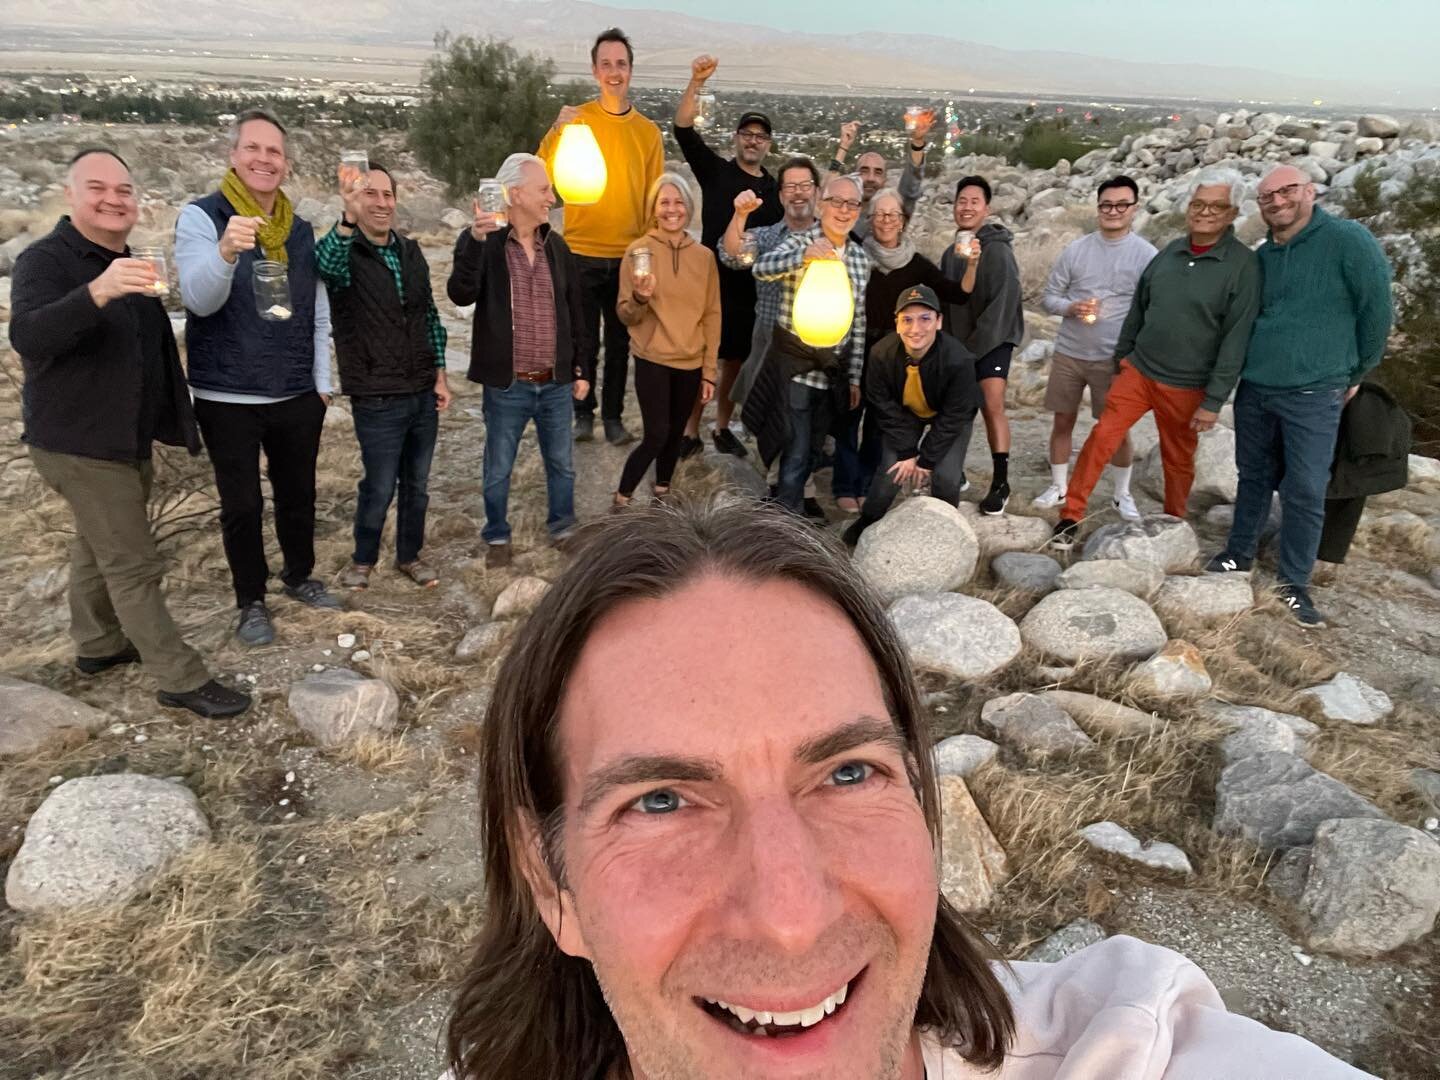 Solstice hike! What a warm and comforting way to celebrate the shortest day of the year, and to welcome in the new light. 
#palmsprings #solstice #shortestday #walkingmeditation